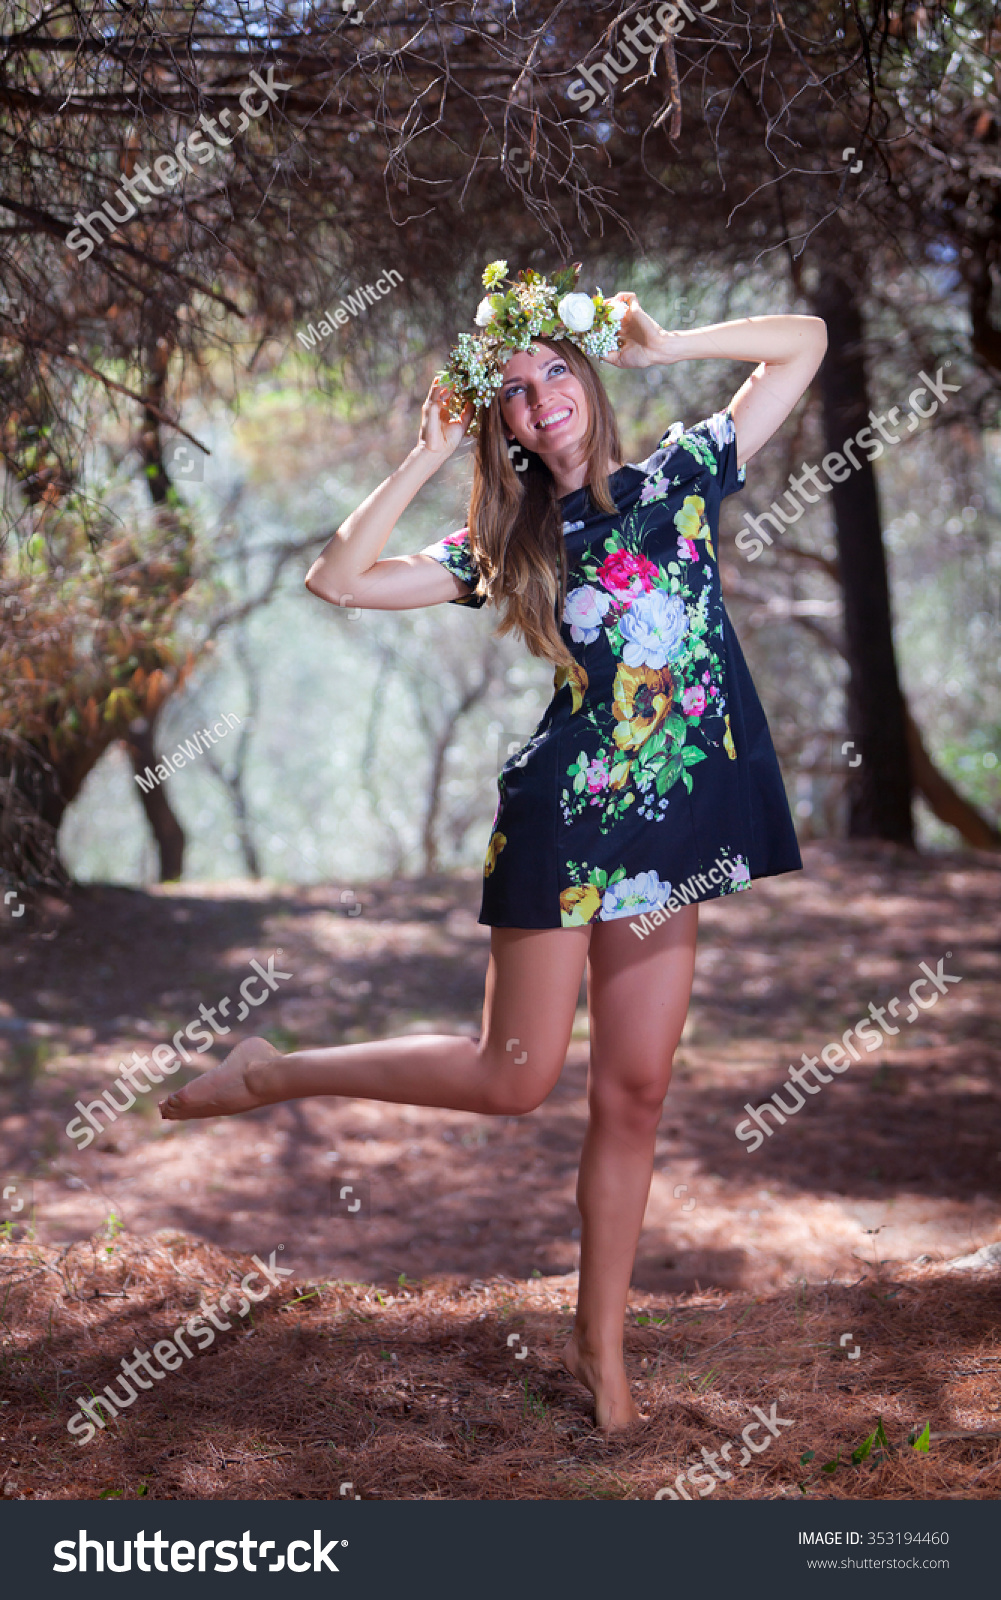 https://image.shutterstock.com/shutterstock/photos/353194460/display_1500/stock-photo-young-pretty-woman-in-a-olive-forest-353194460.jpg